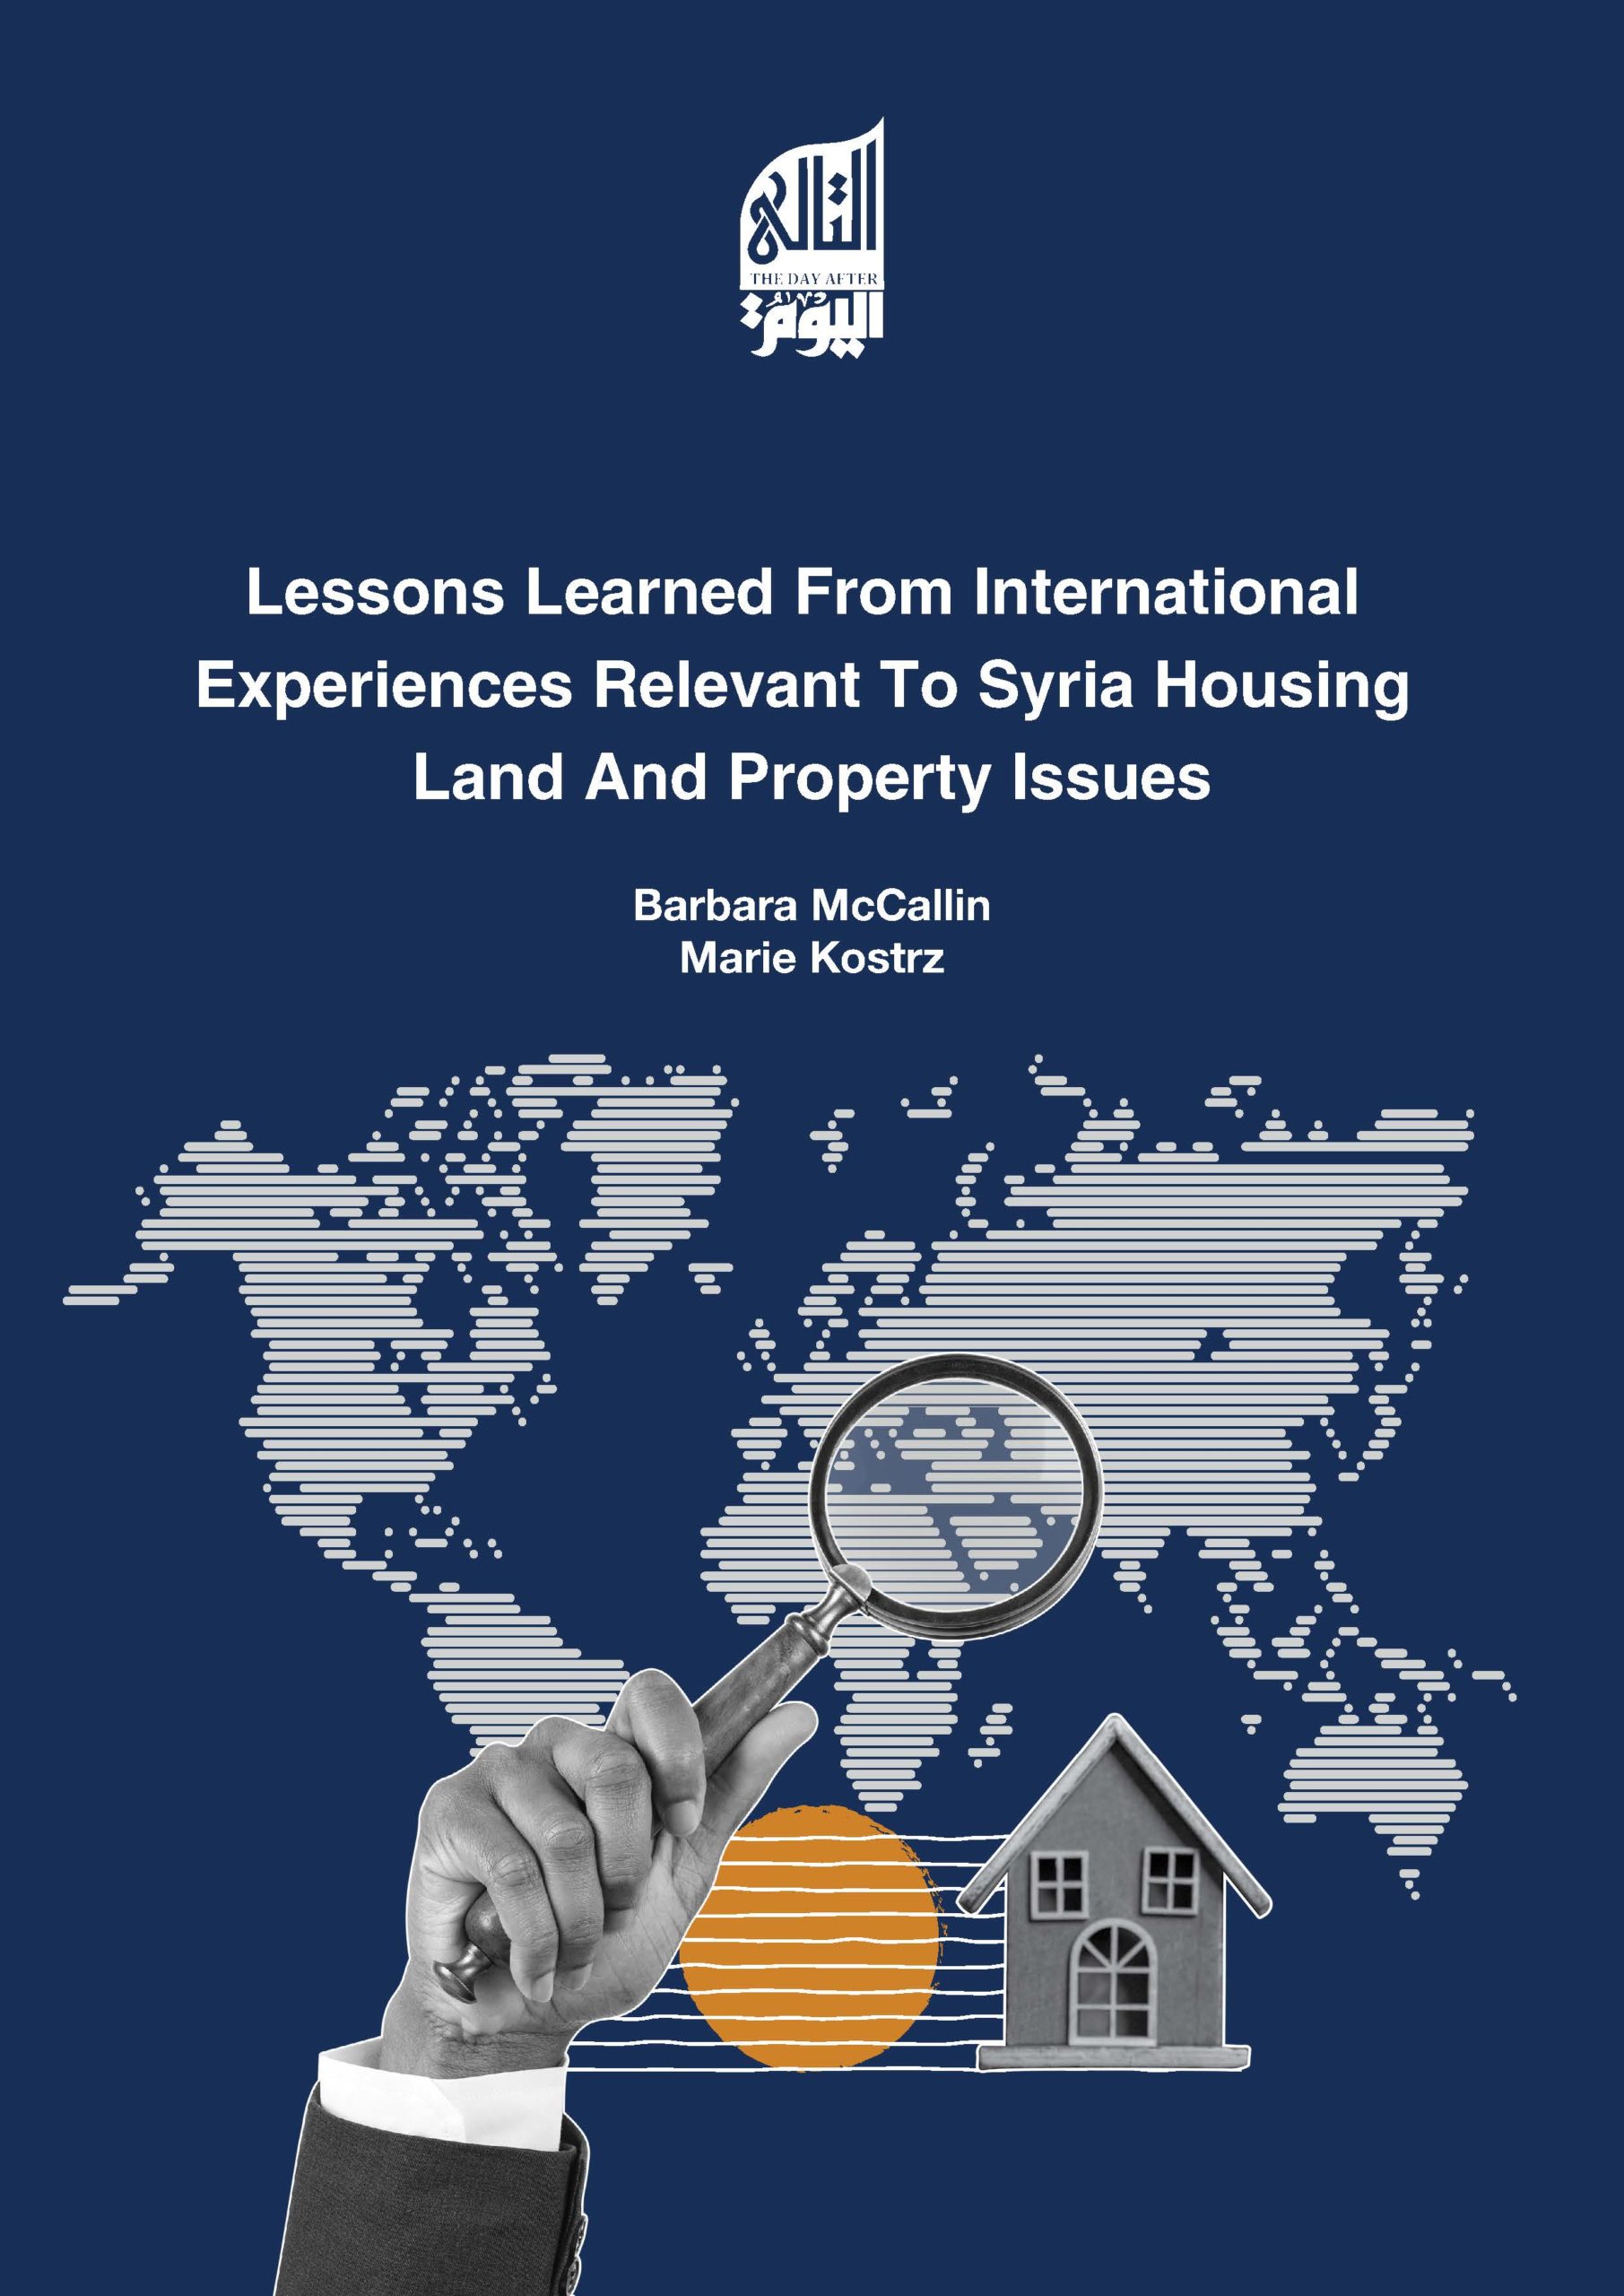 Lessons Learned From International Experiences Relevant To Syria Housing Land And Property Issues